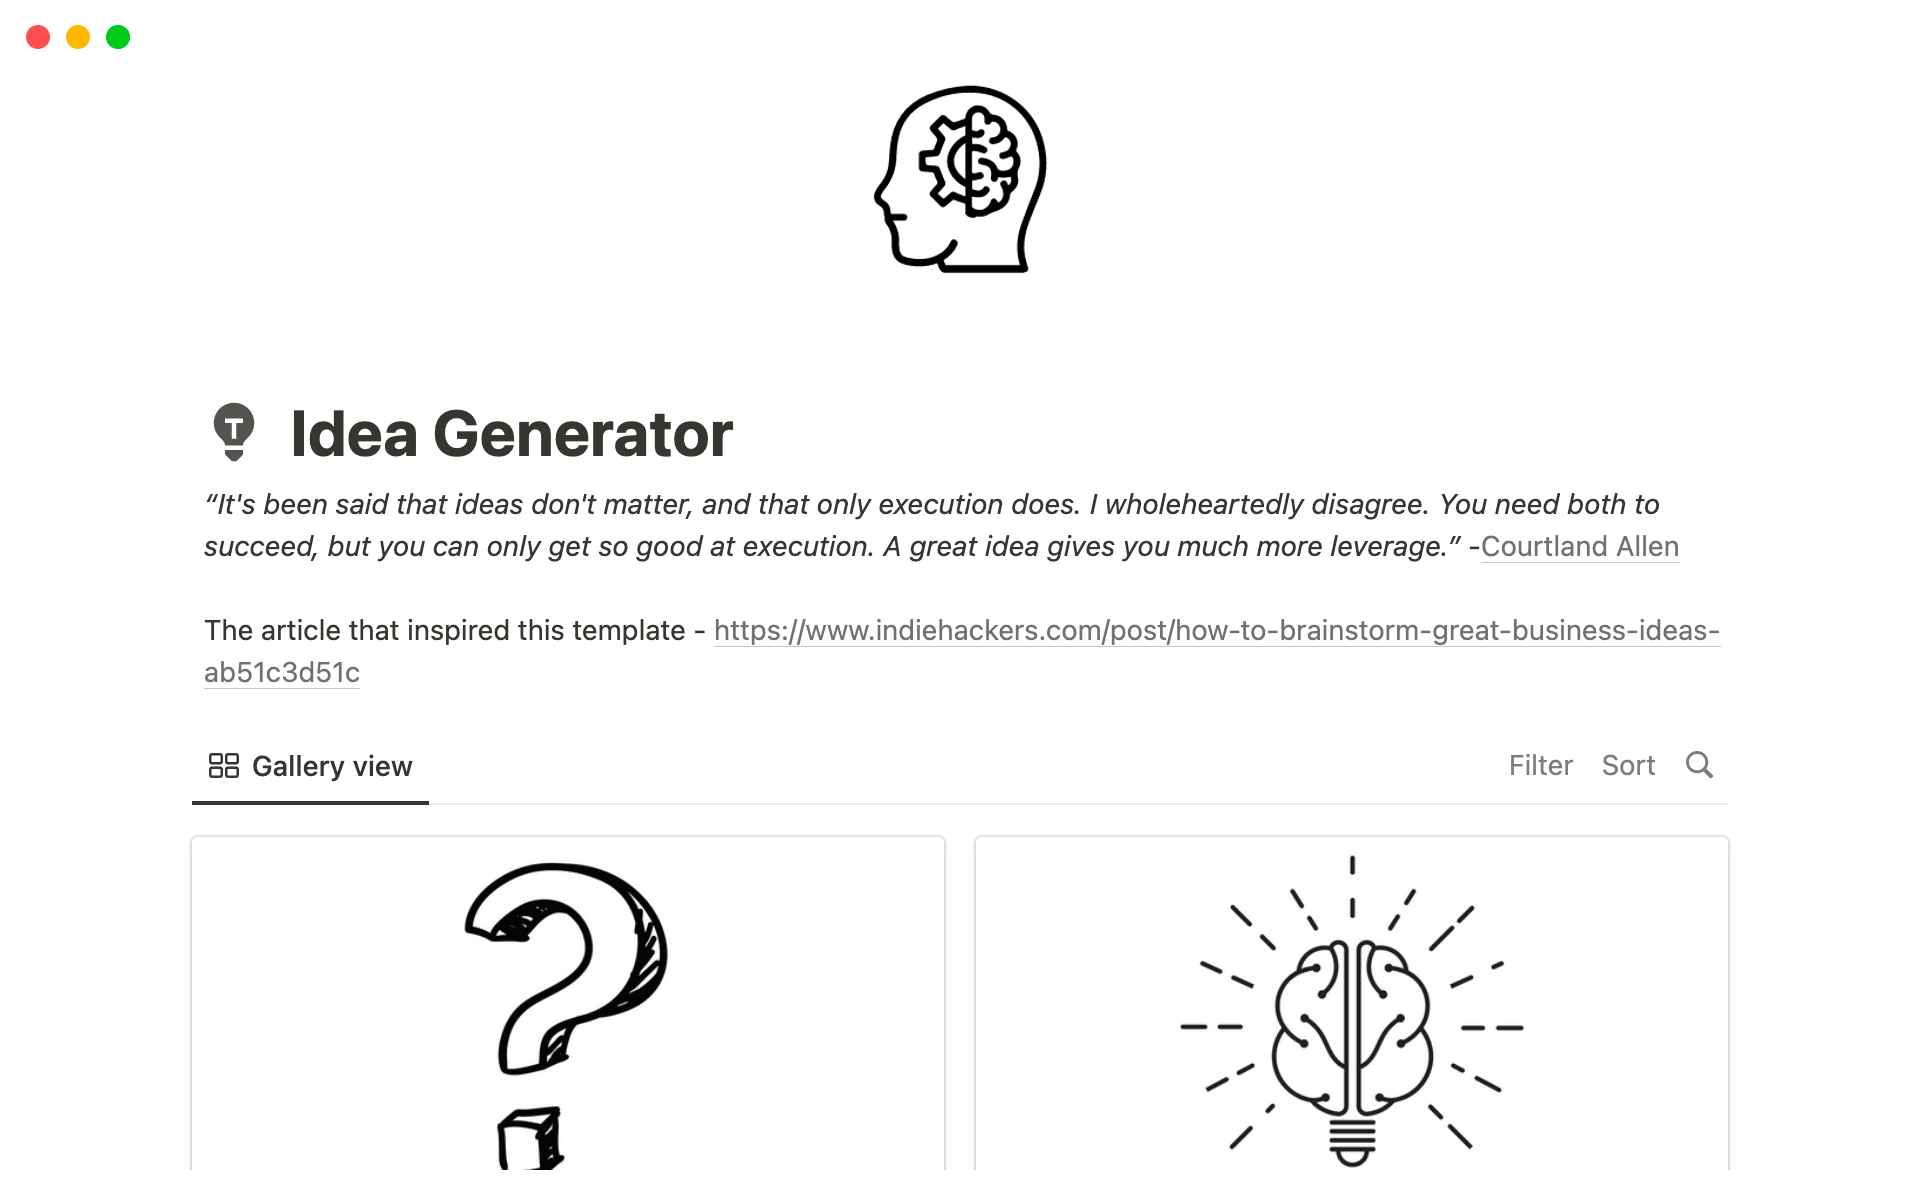 Helps you generate content and product ideas through problem based ideation.